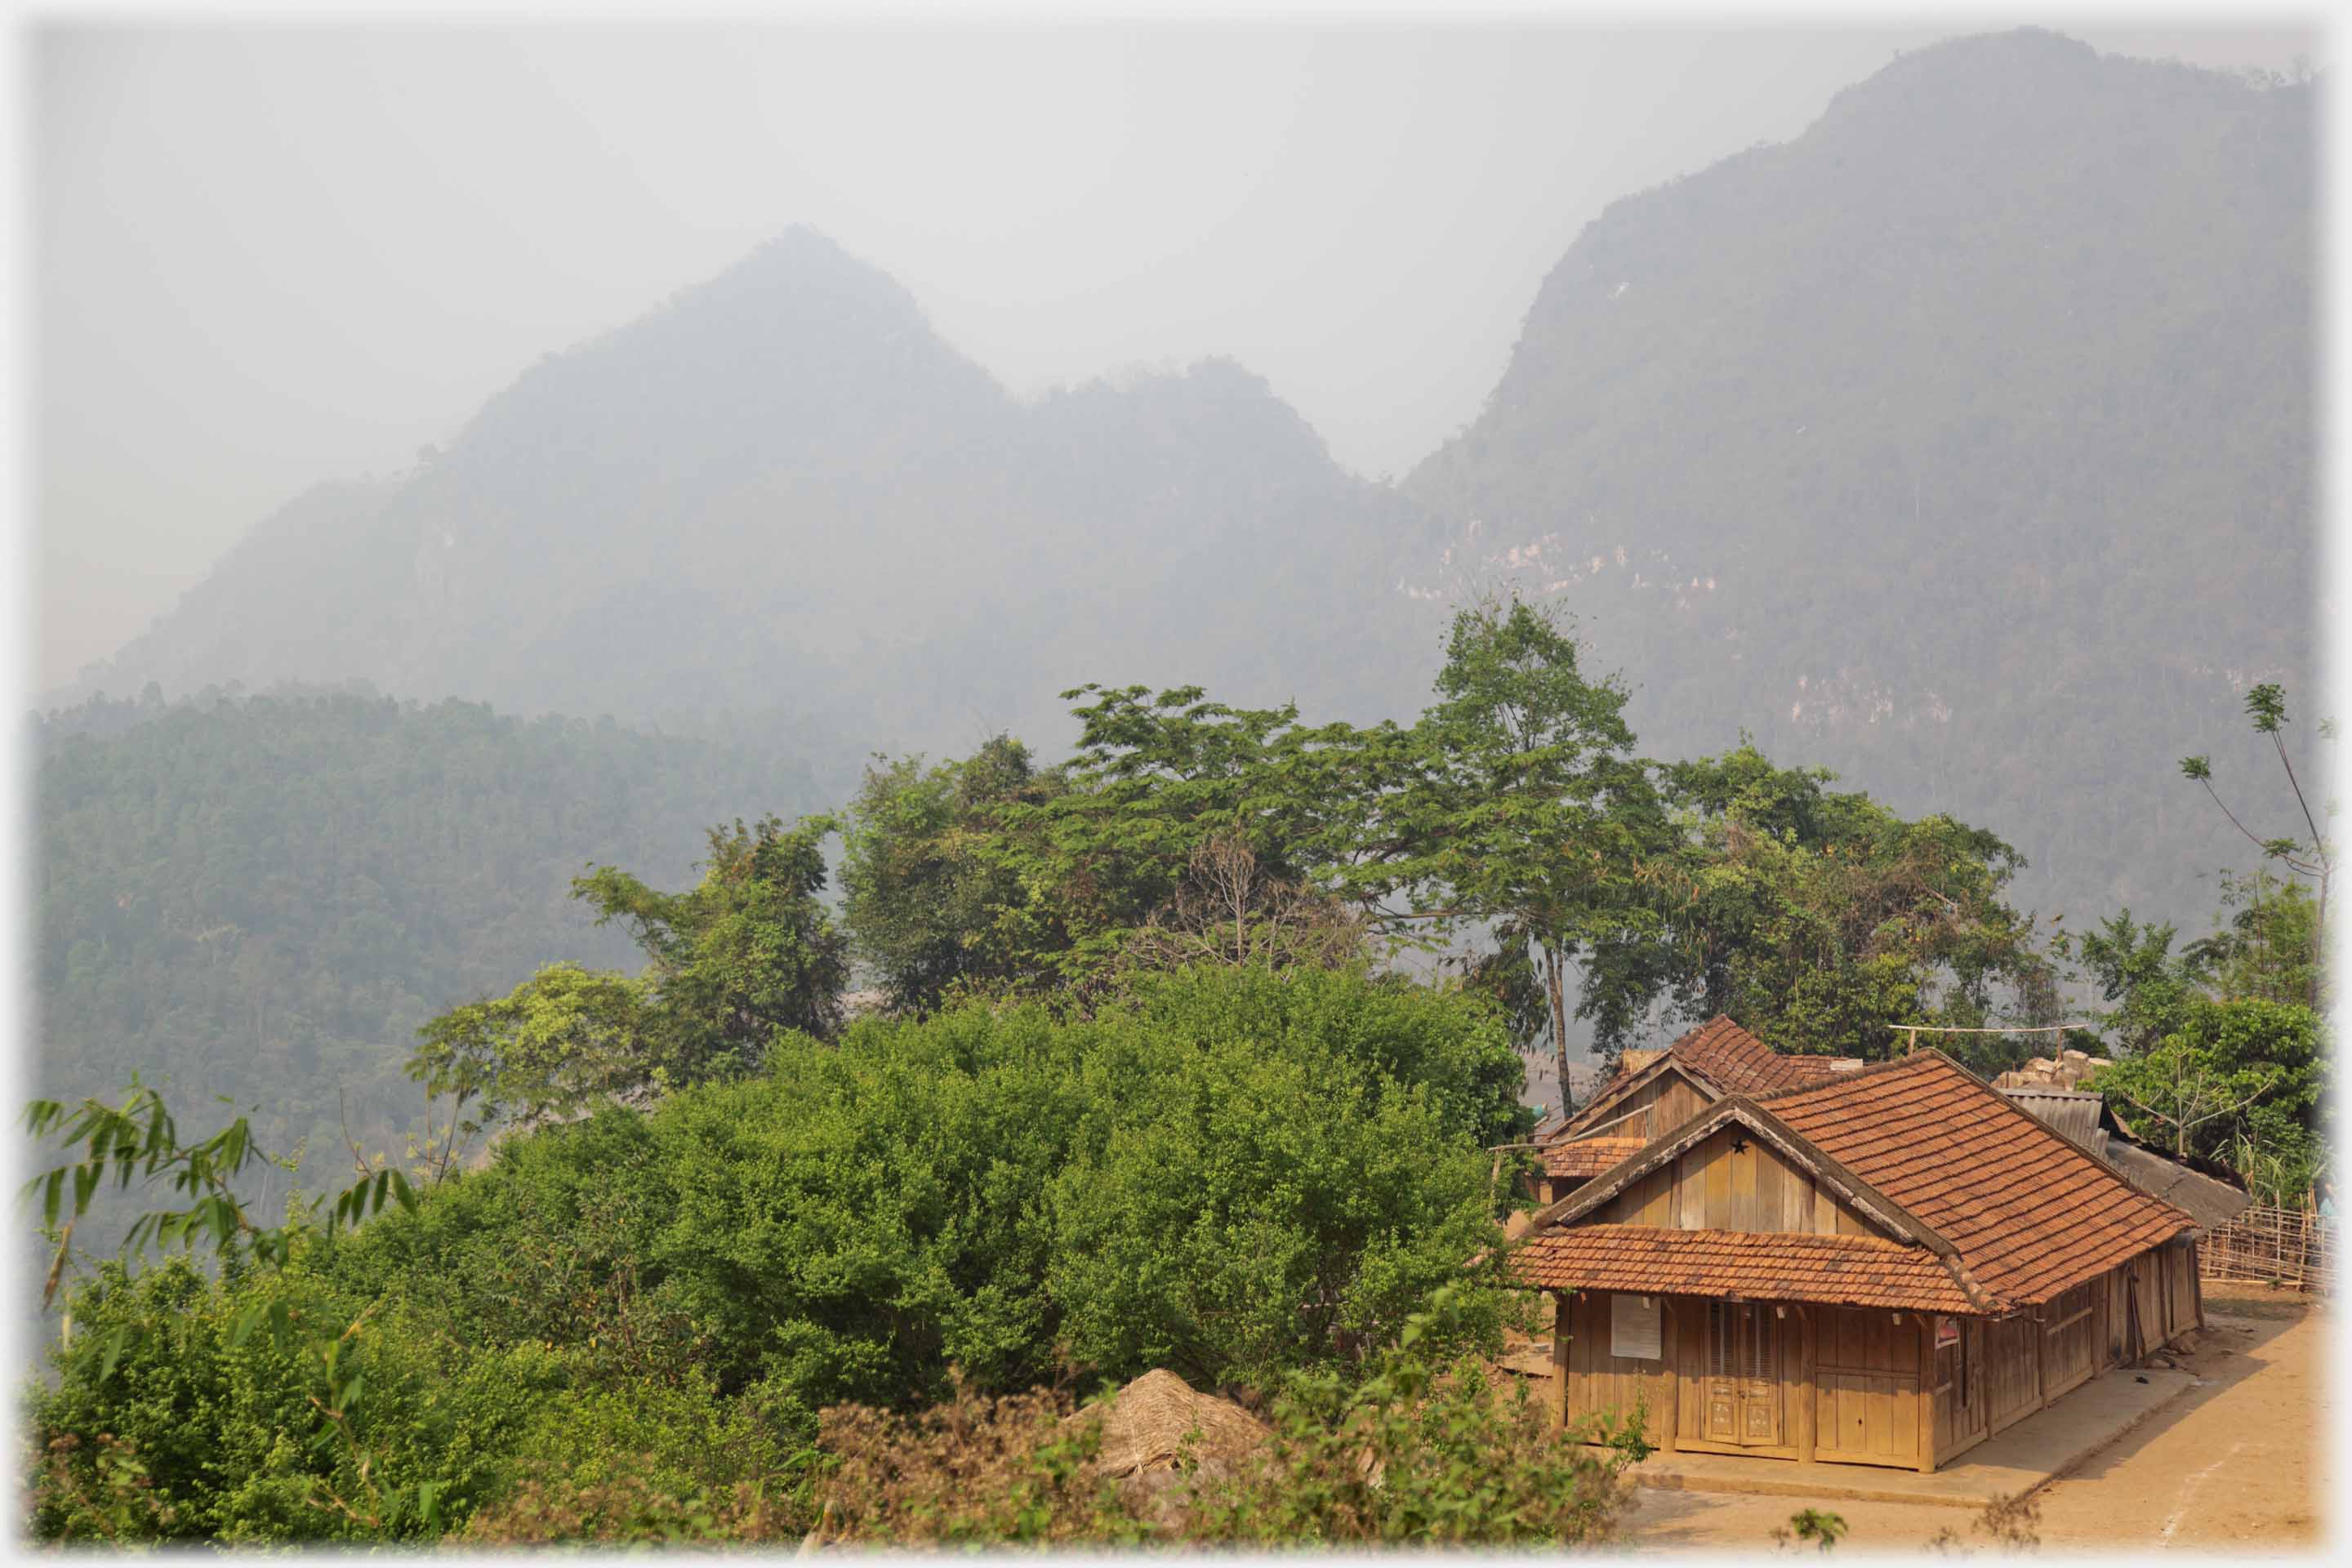 Large pan-tiled roof on house without pillared veranda, mountains in background.